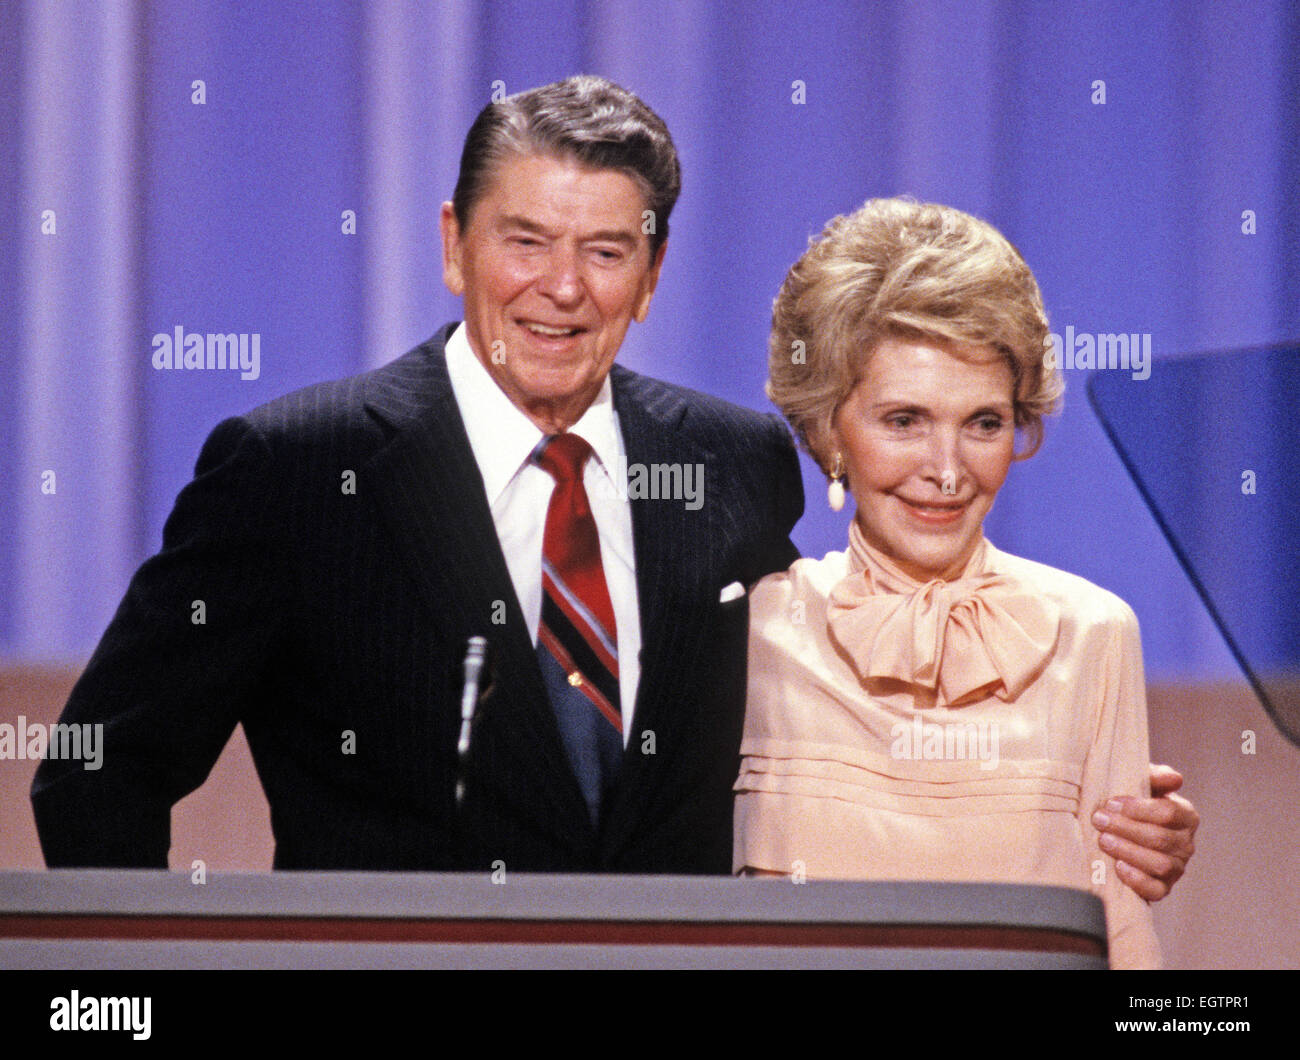 United States President Ronald Reagan and first lady Nancy Reagan on the podium of the 1988 Republican Convention as they acknowledge their supporters at the Super Dome in New Orleans, Louisiana on August 15, 1988. Credit: Arnie Sachs / CNP - NO WIRE SERVICE - Stock Photo